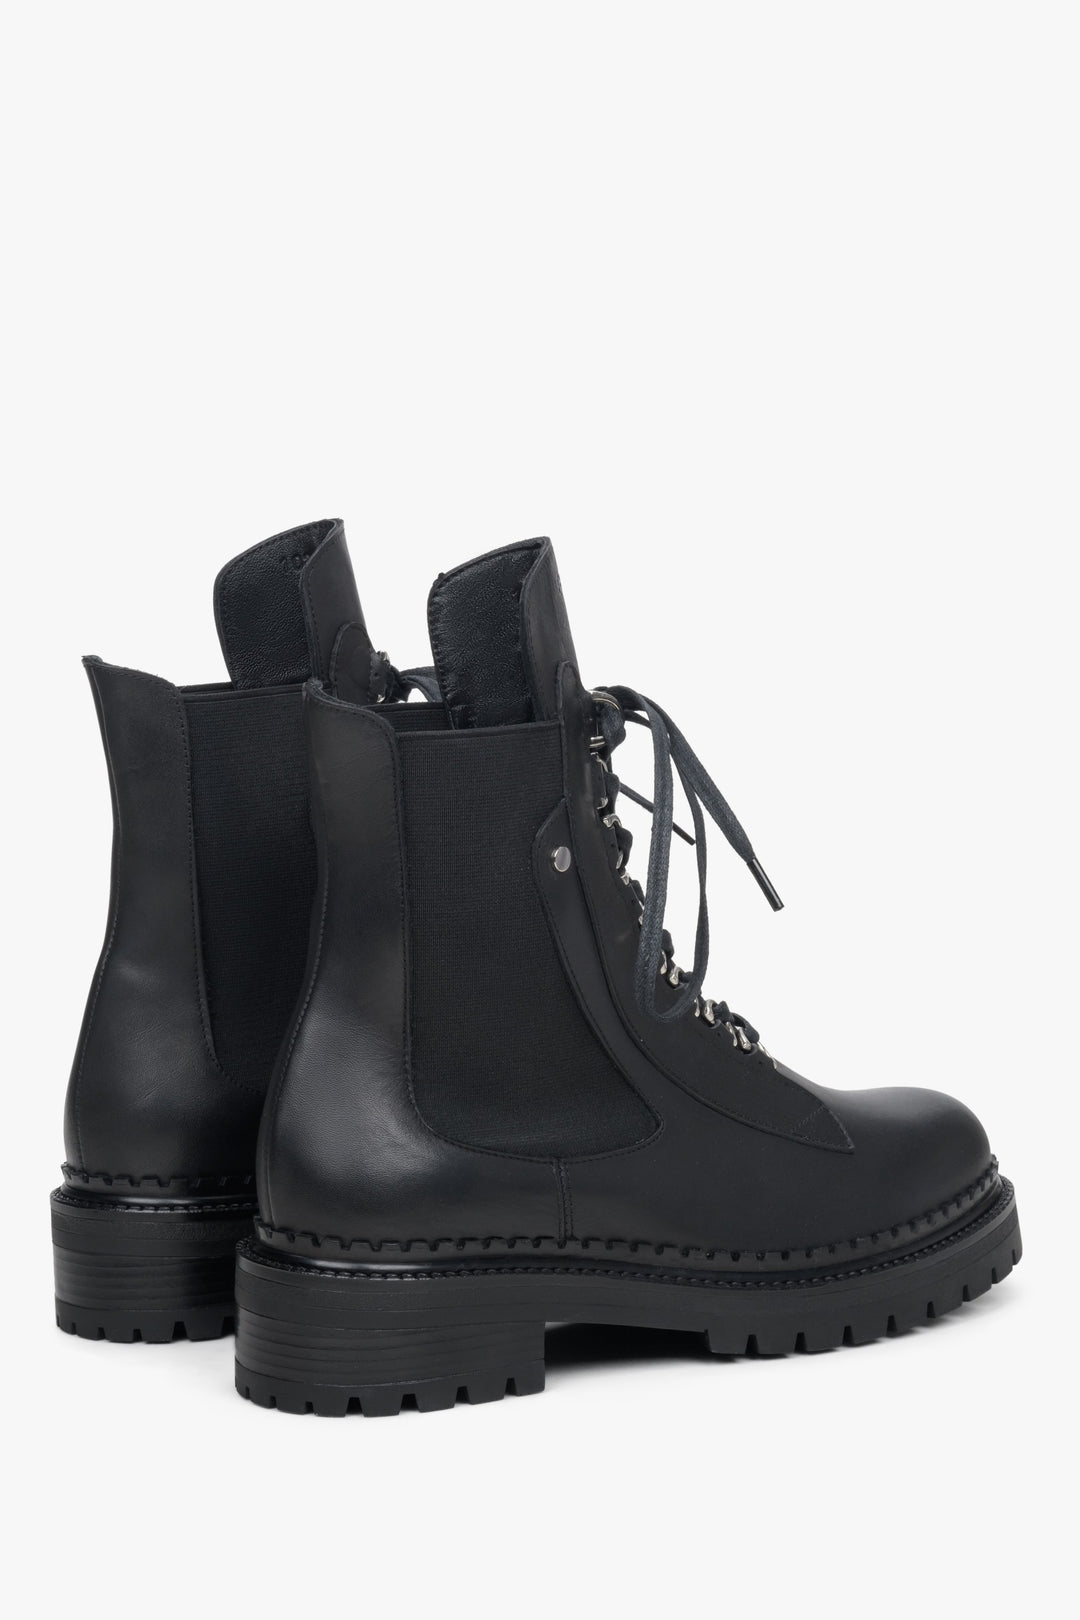 Women's black leather ankle boots in black - close-up on shoeline.